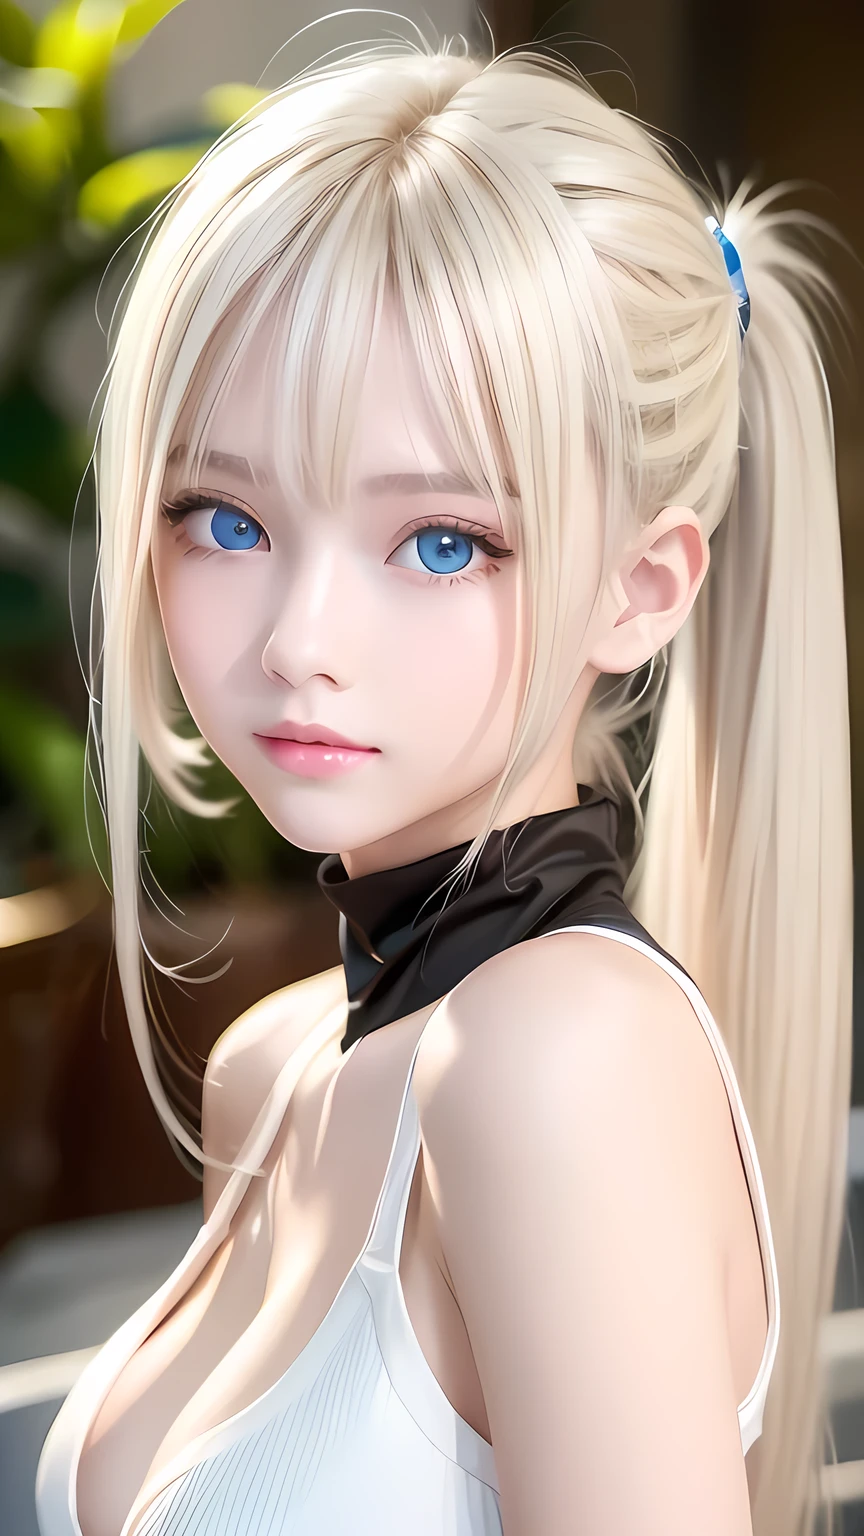 Portrait、、Bright expression、ponytail、Young, lustrous, glowing, white skin、The best beauty、Blonde reflection、Platinum blonde hair with dazzling highlights、Shiny bright hair,、Super long silky straight hair、Shiny beautiful bangs、Bright, clear, attractive, large blue eyes、Very beautiful lovely cute 16 year old girl、Ample Bust